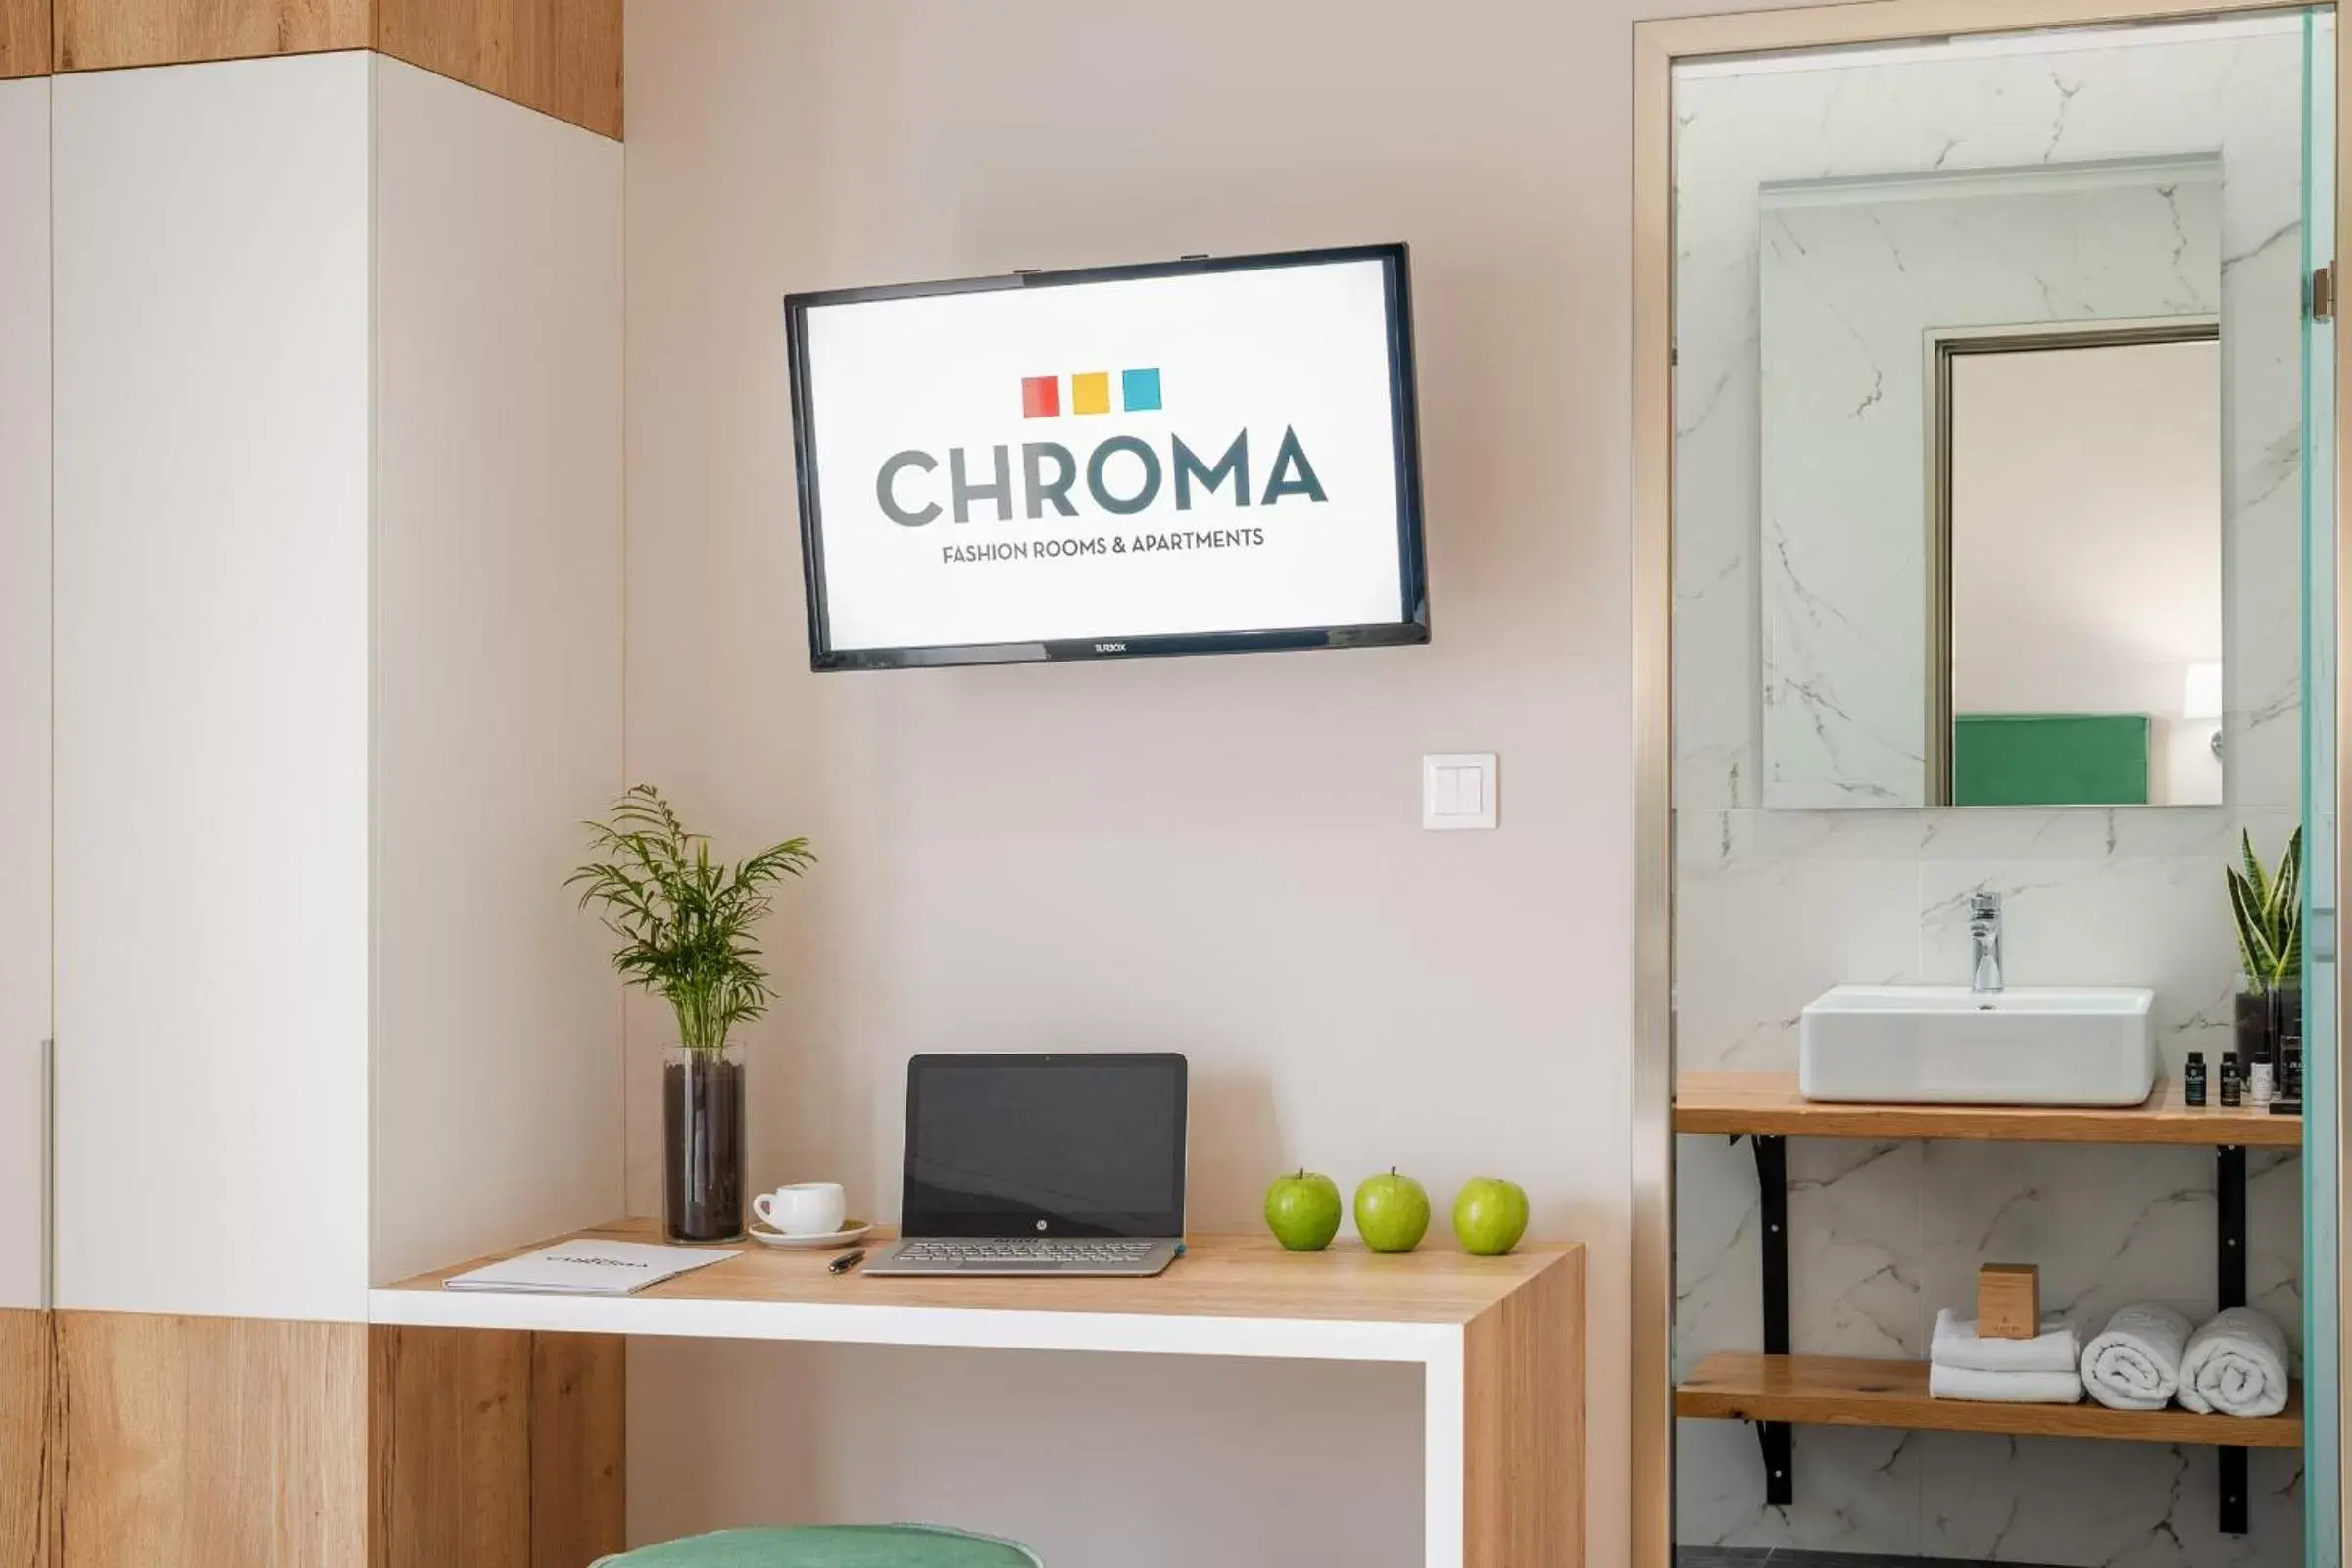 TV/Entertainment Center in CHROMA FASHION ROOMS & APARTMENTS